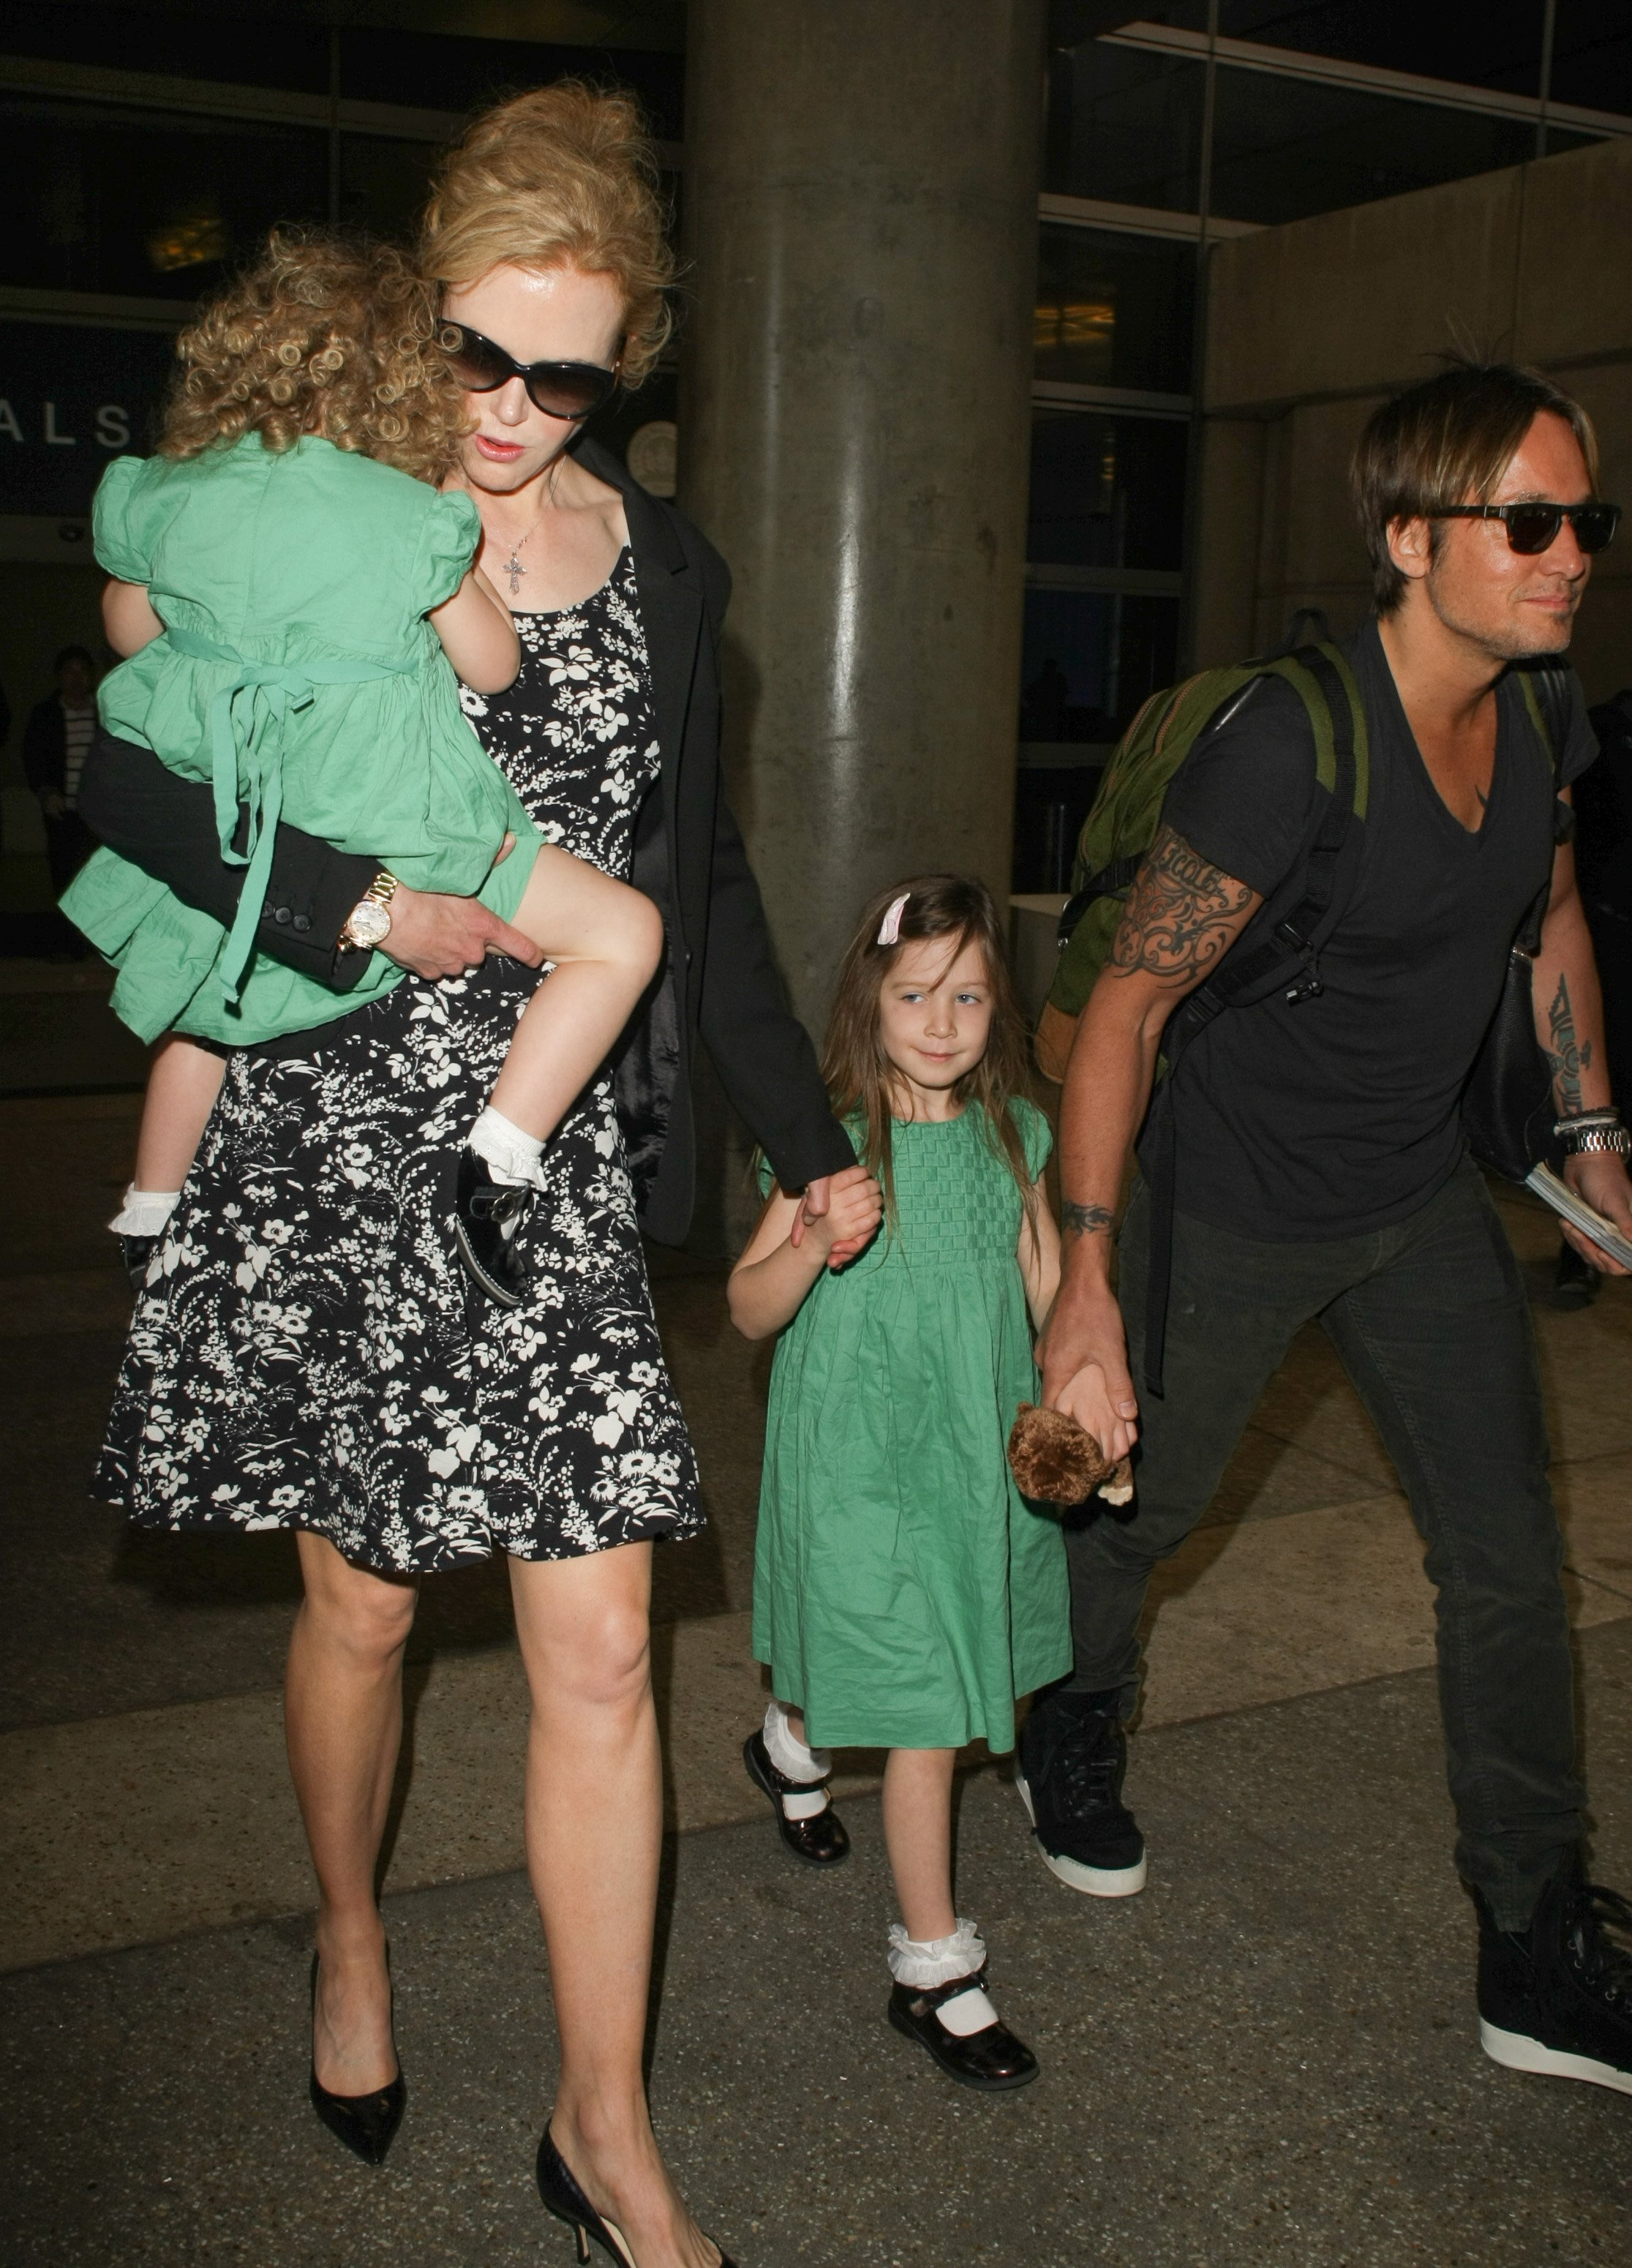 Nicole Kidman, Keith Urban and their daughters, Sunday Rose Kidman Urban and Faith Margaret Kidman Urban are seen at LAX airport on January 02, 2014 in Los Angeles, California. | Source: Getty Images